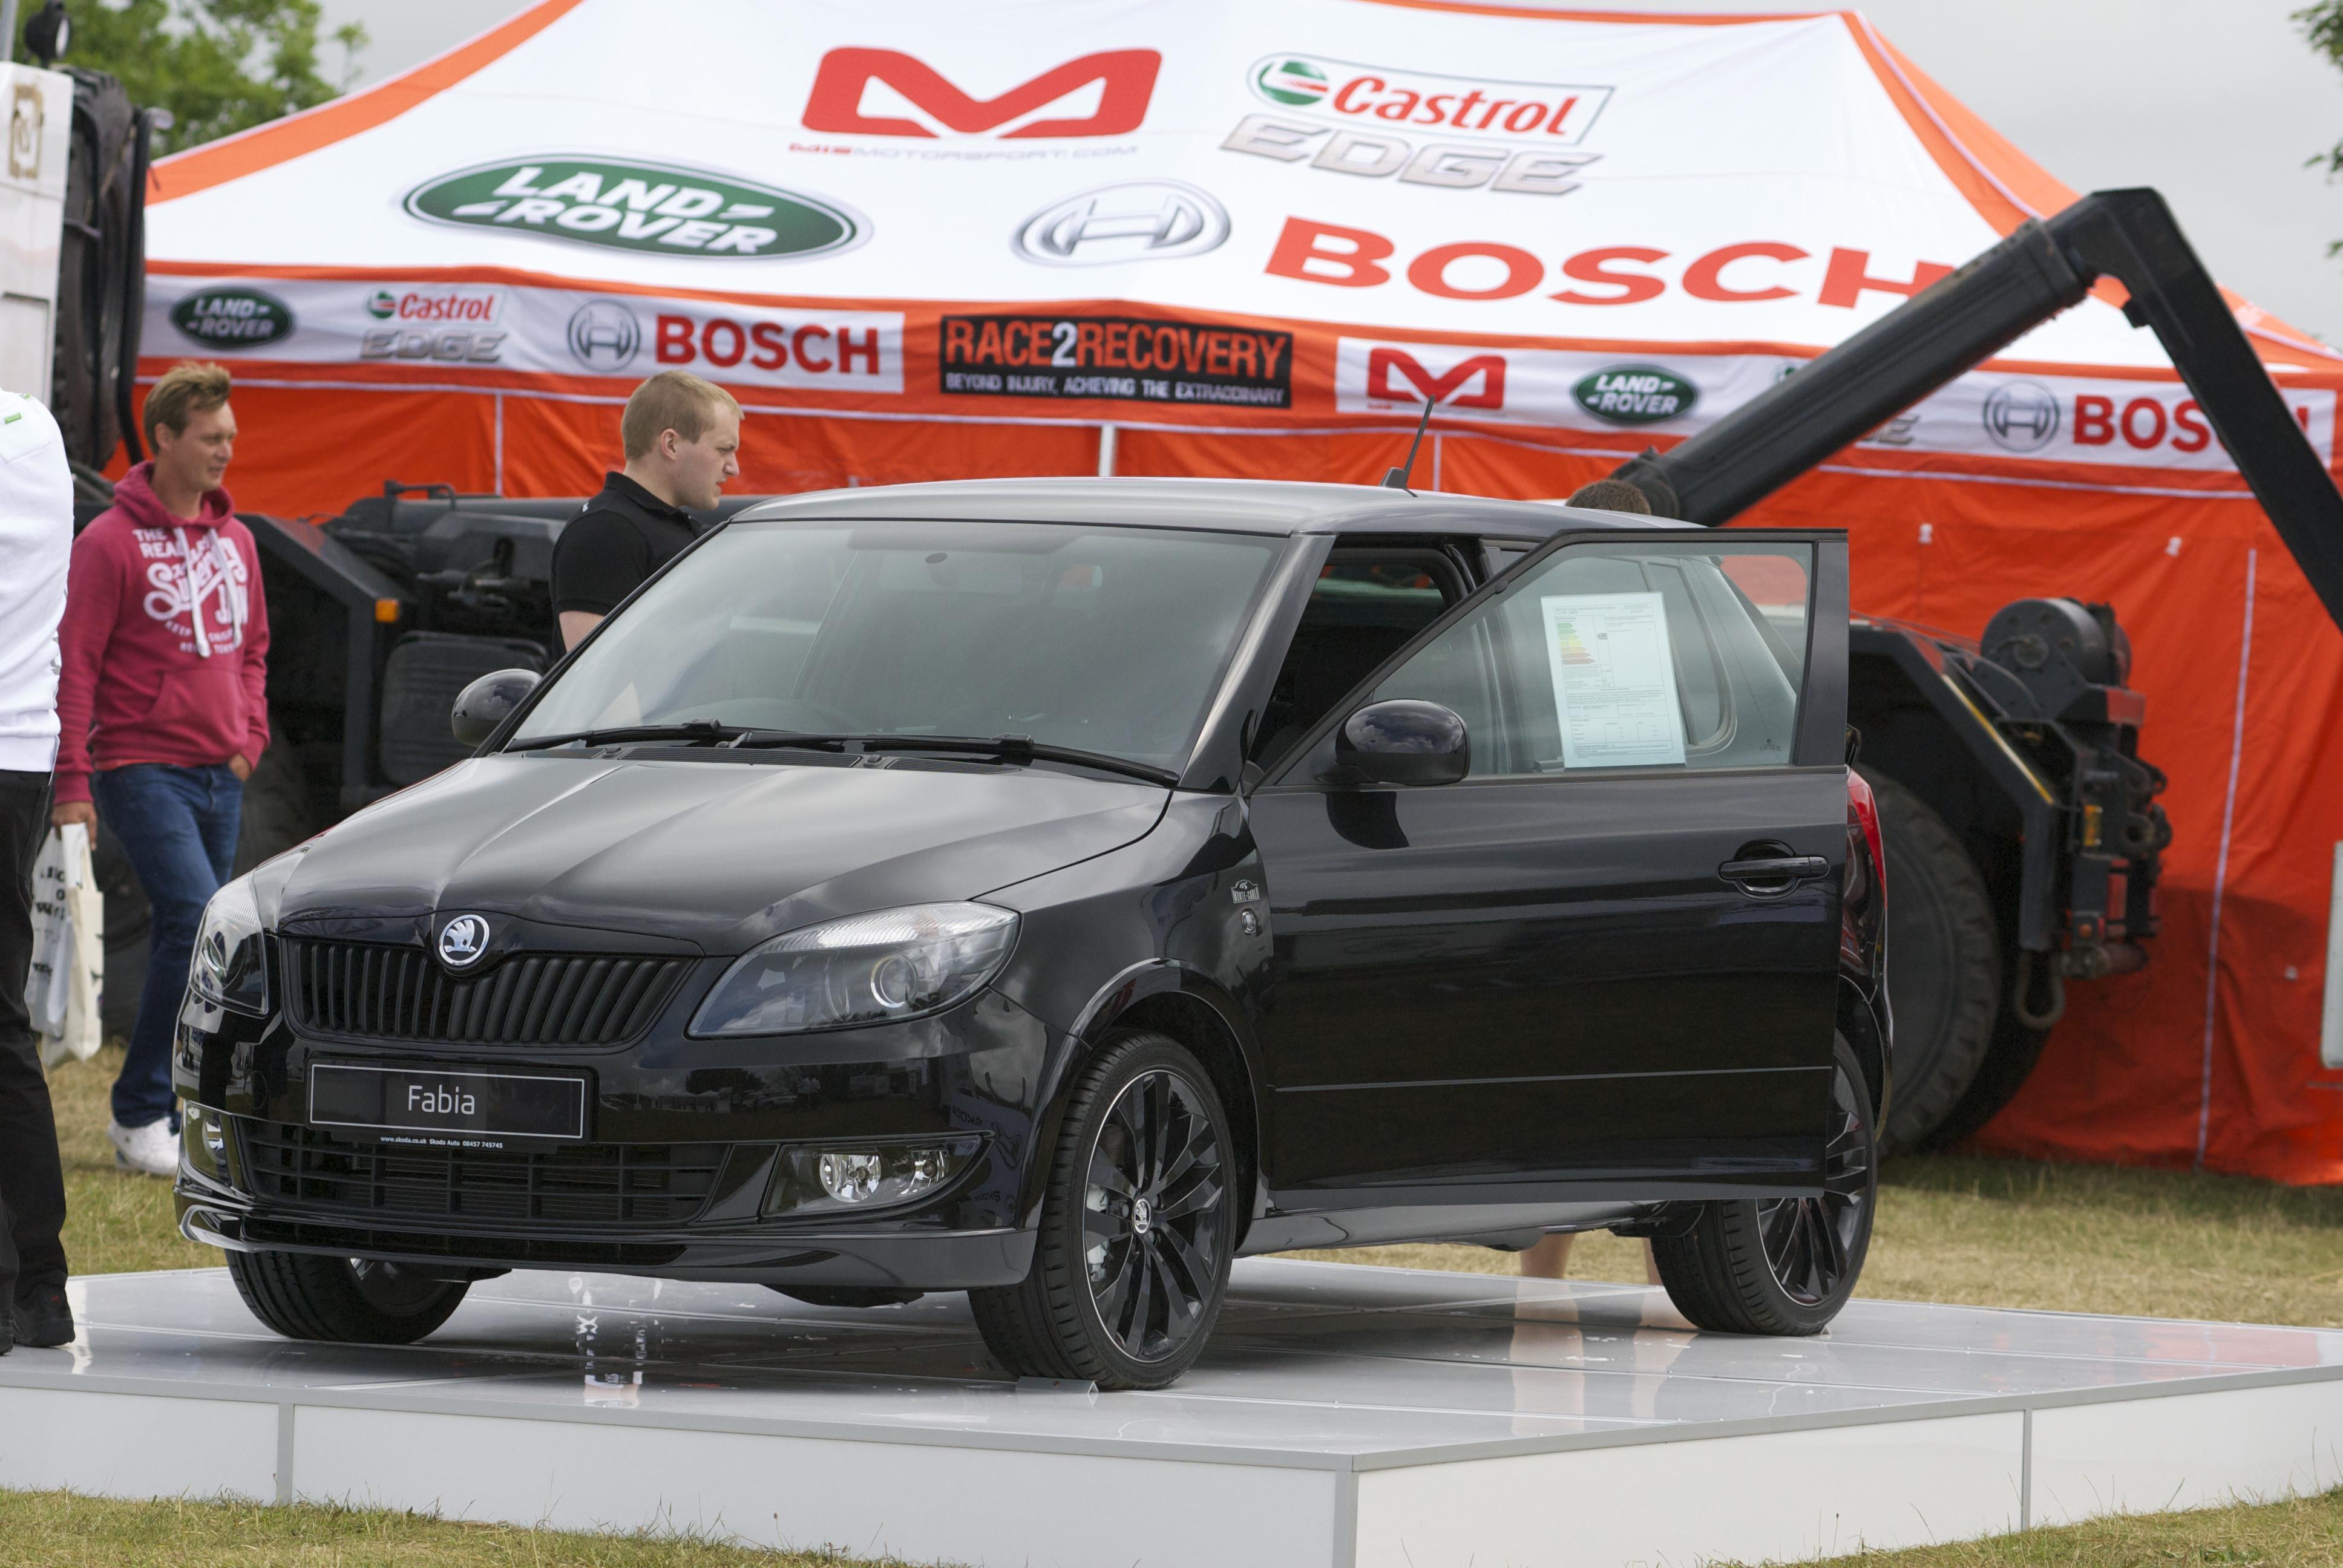 flod periskop Dam ŠKODA UK on Twitter: "How do you like the new Fabia Black Edition?  Available in both hatch and estate with 104bhp 1.2-litre TSI engine  http://t.co/axZTxUeOUh" / Twitter